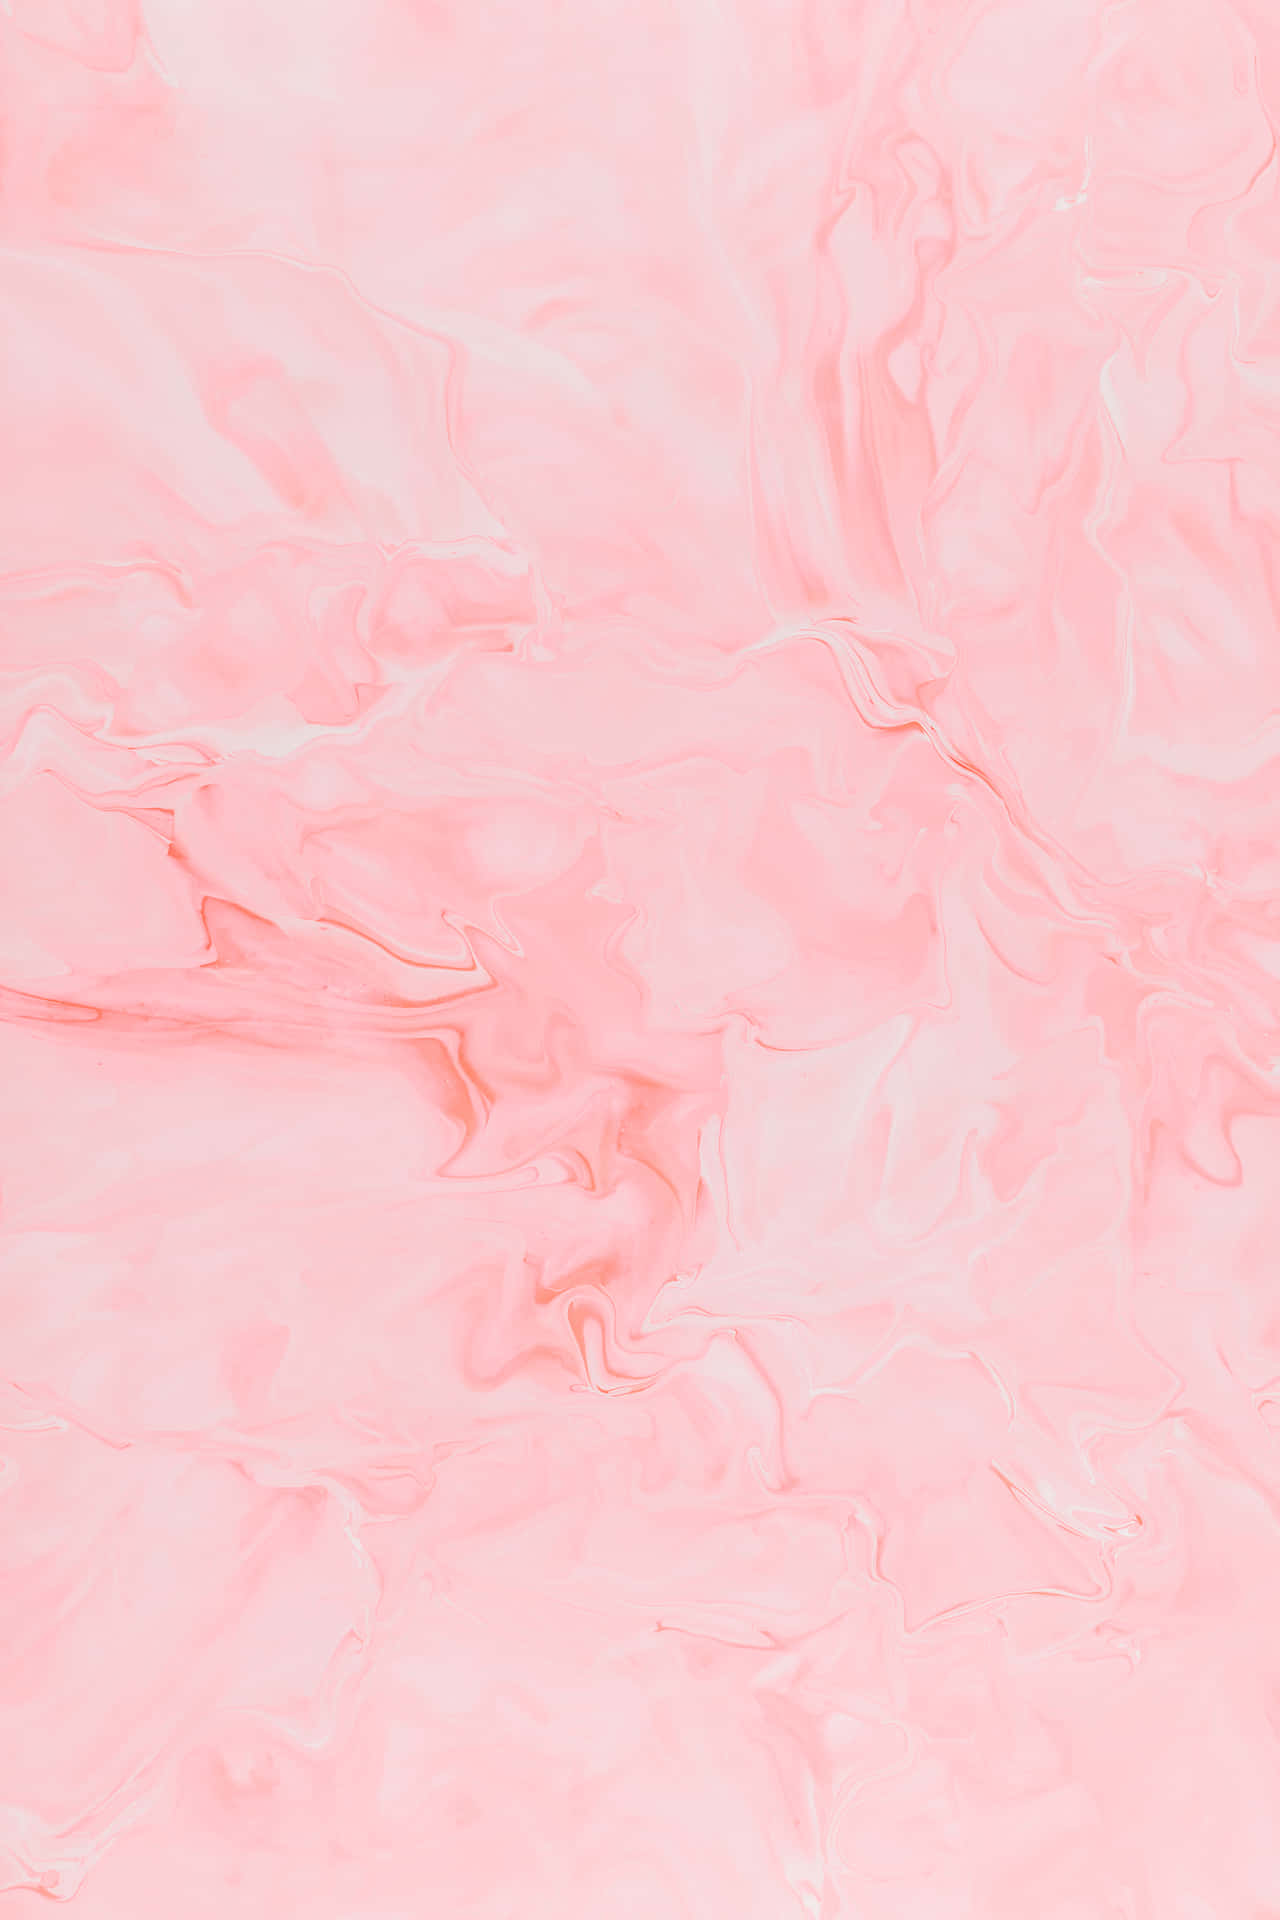 A Pink Marble Texture Background Wallpaper